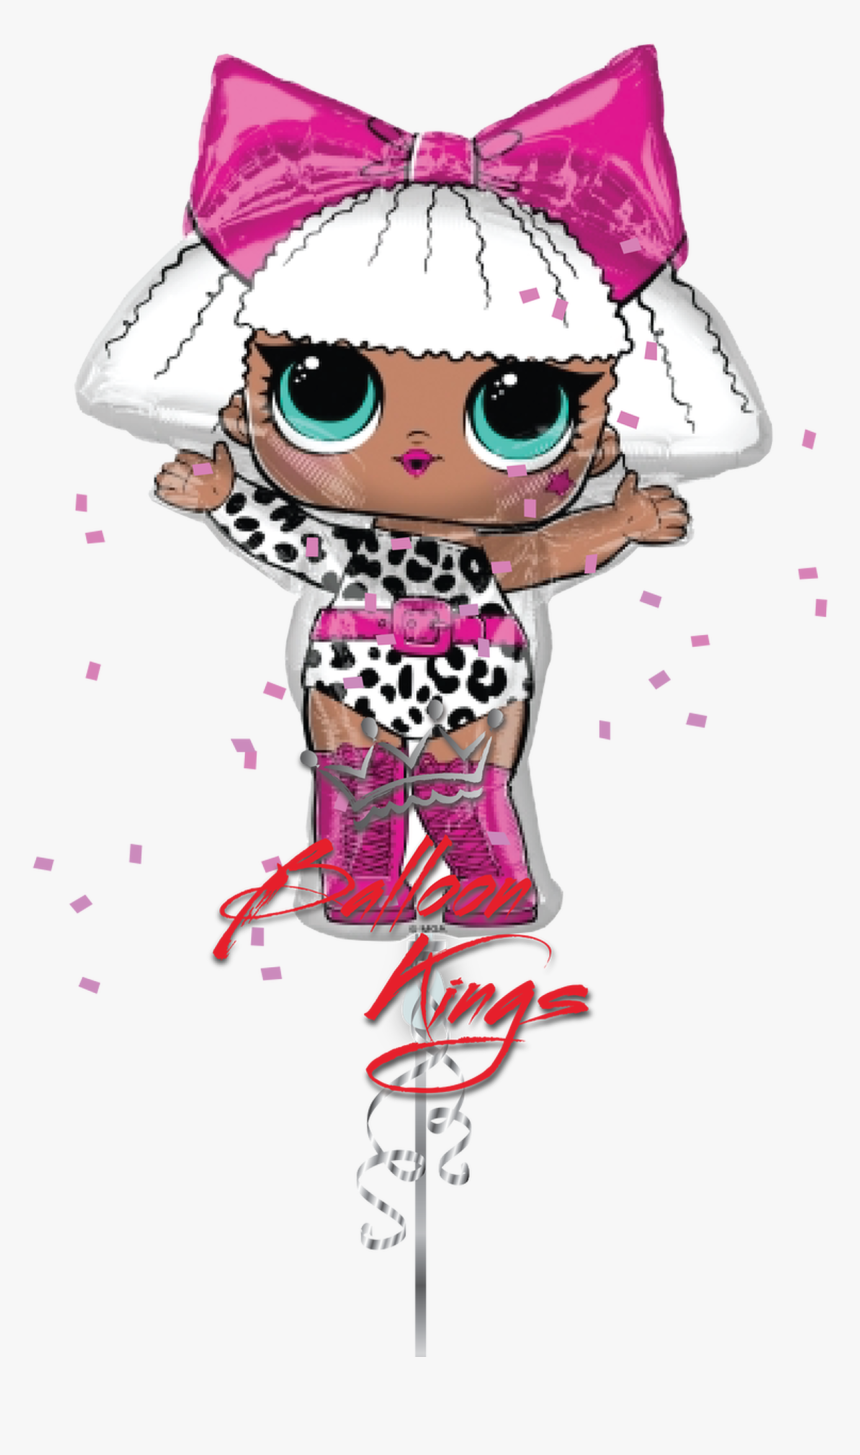 Lol Surprise Diva - Dolls Lol Surprise Characters, HD Png Download, Free Download